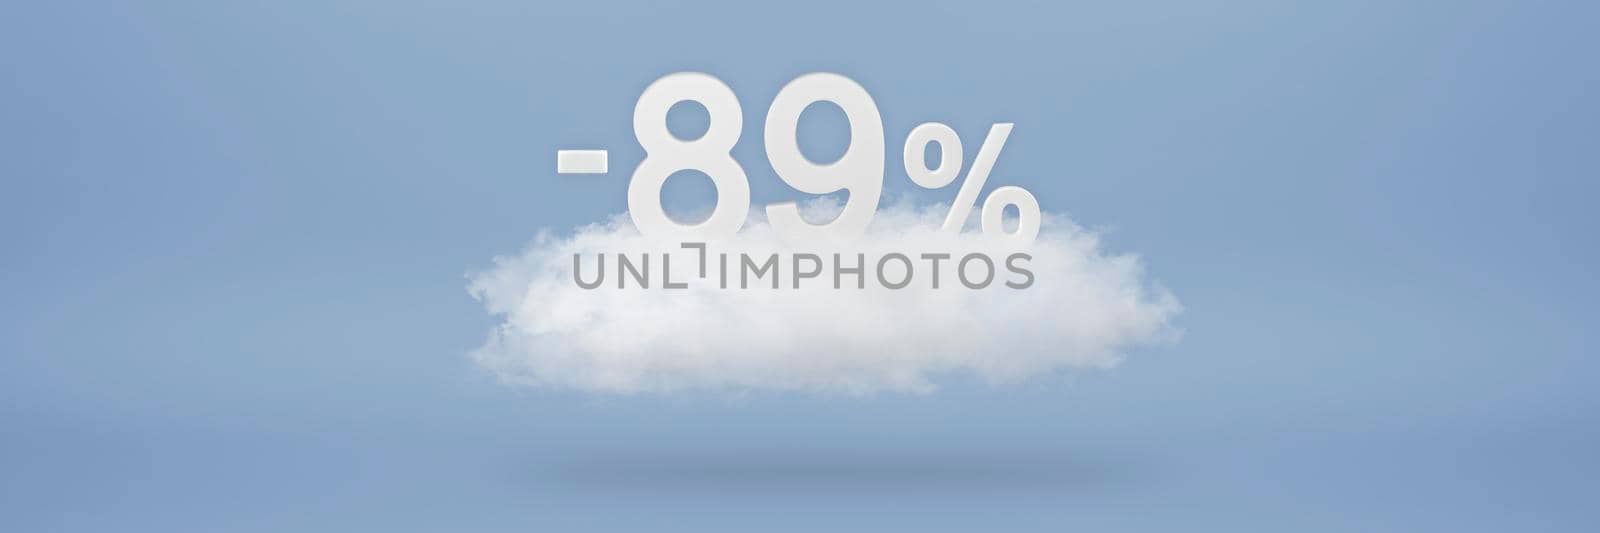 Discount 89 percent. Big discounts, sale up to eighty nine percent. 3D numbers float on a cloud on a blue background. Copy space. Advertising banner and poster to be inserted into the project by SERSOL